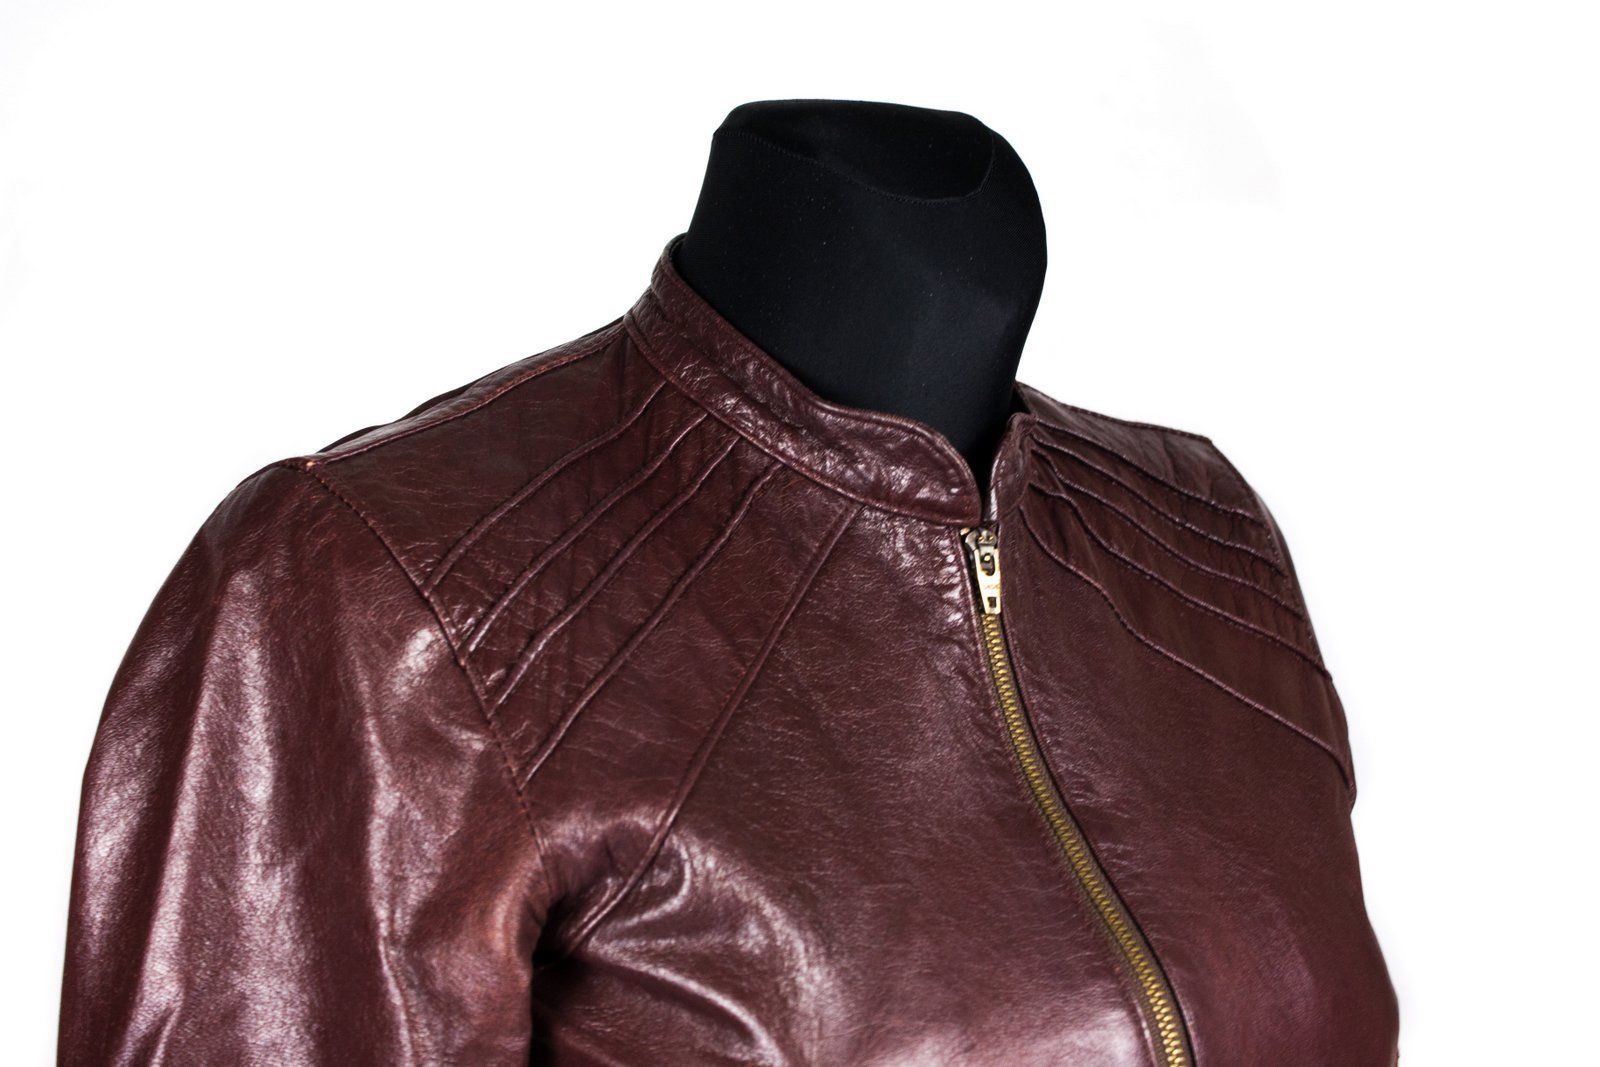 BEBE Cafe Racer Style Leather Jacket, XS - secondfirst